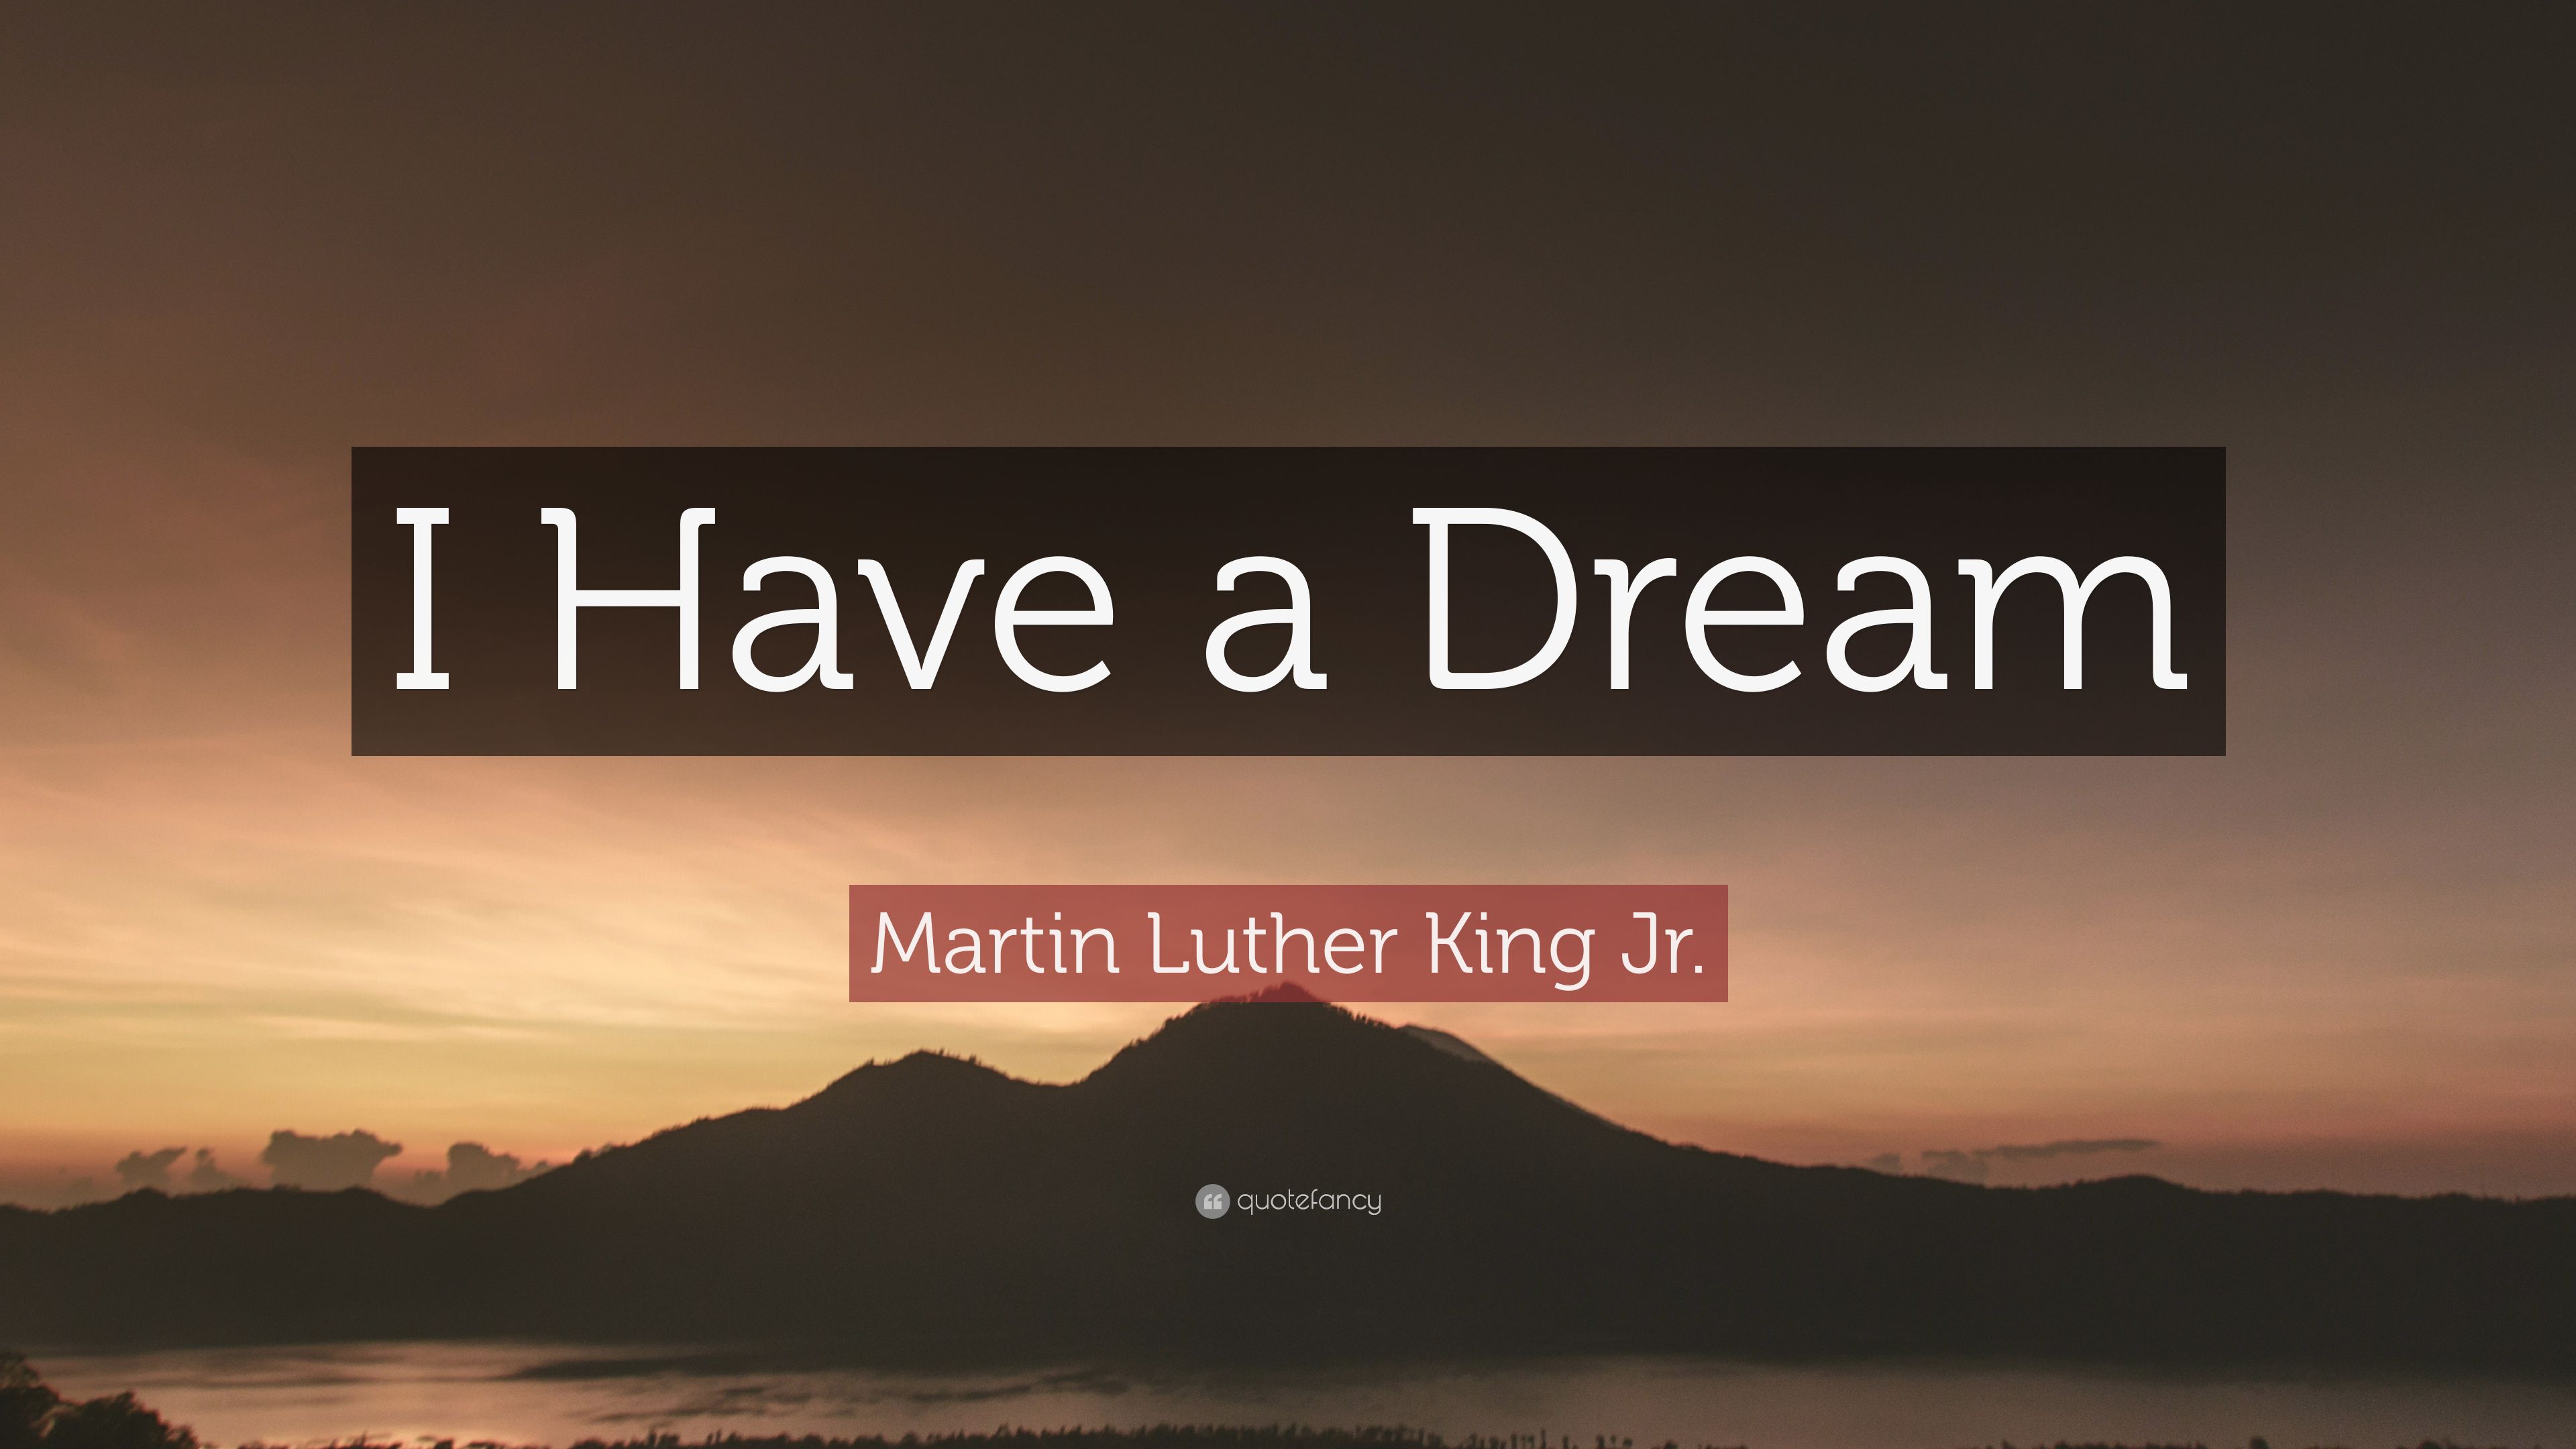 Martin Luther King, Jr. Wallpaper. Martin Luther Wallpaper, Martin Luther King, Jr. Wallpaper and Luther BBC Wallpaper